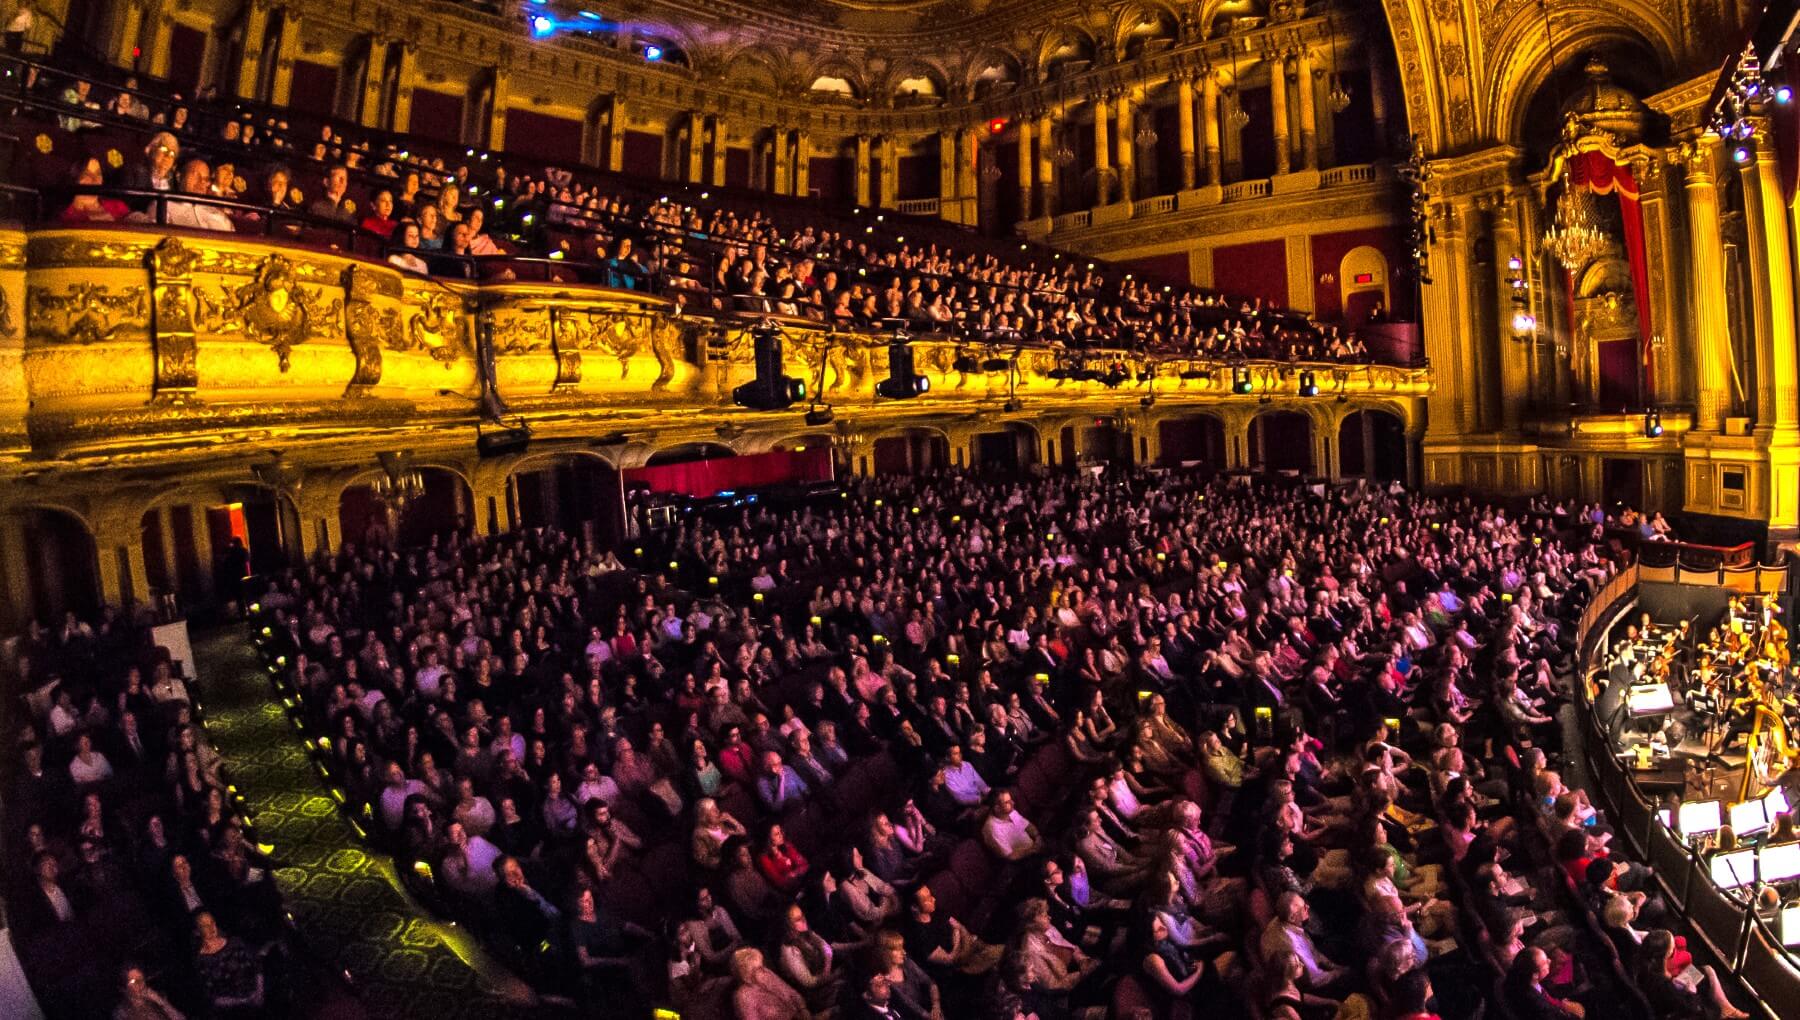 An audience watches a performance in the Boston Opera House auditorium.